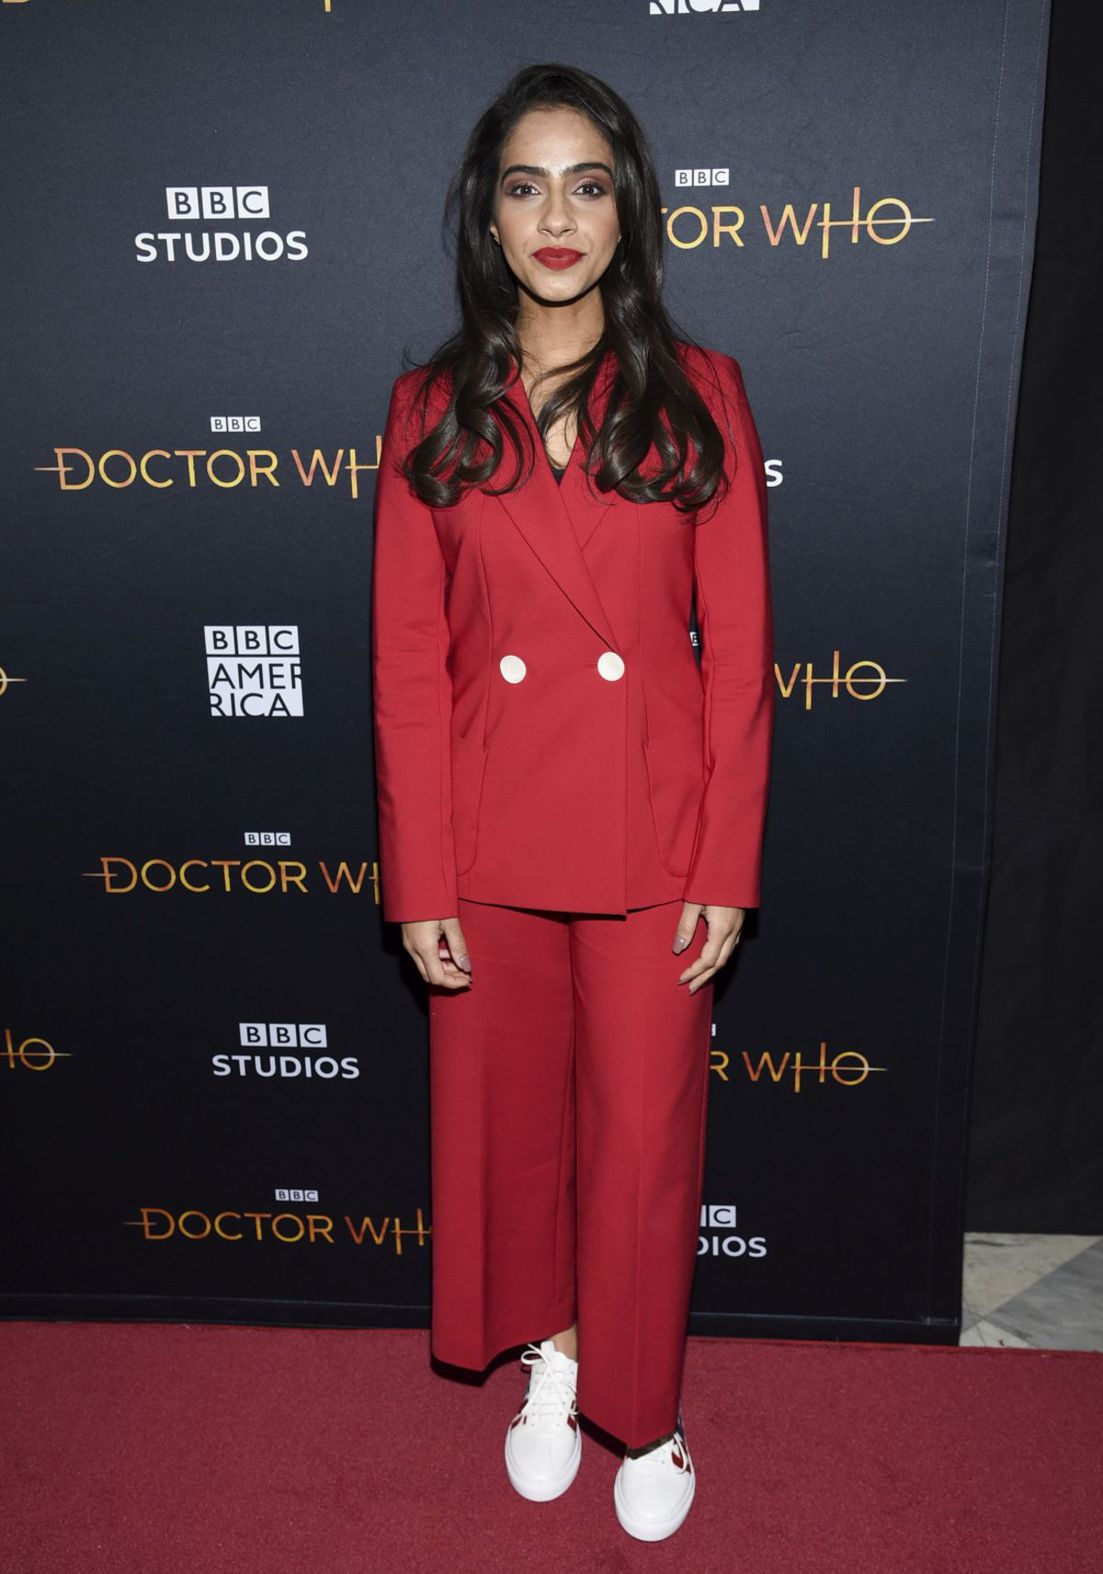 NY Special Screening of BBC America's "Doctor Who"